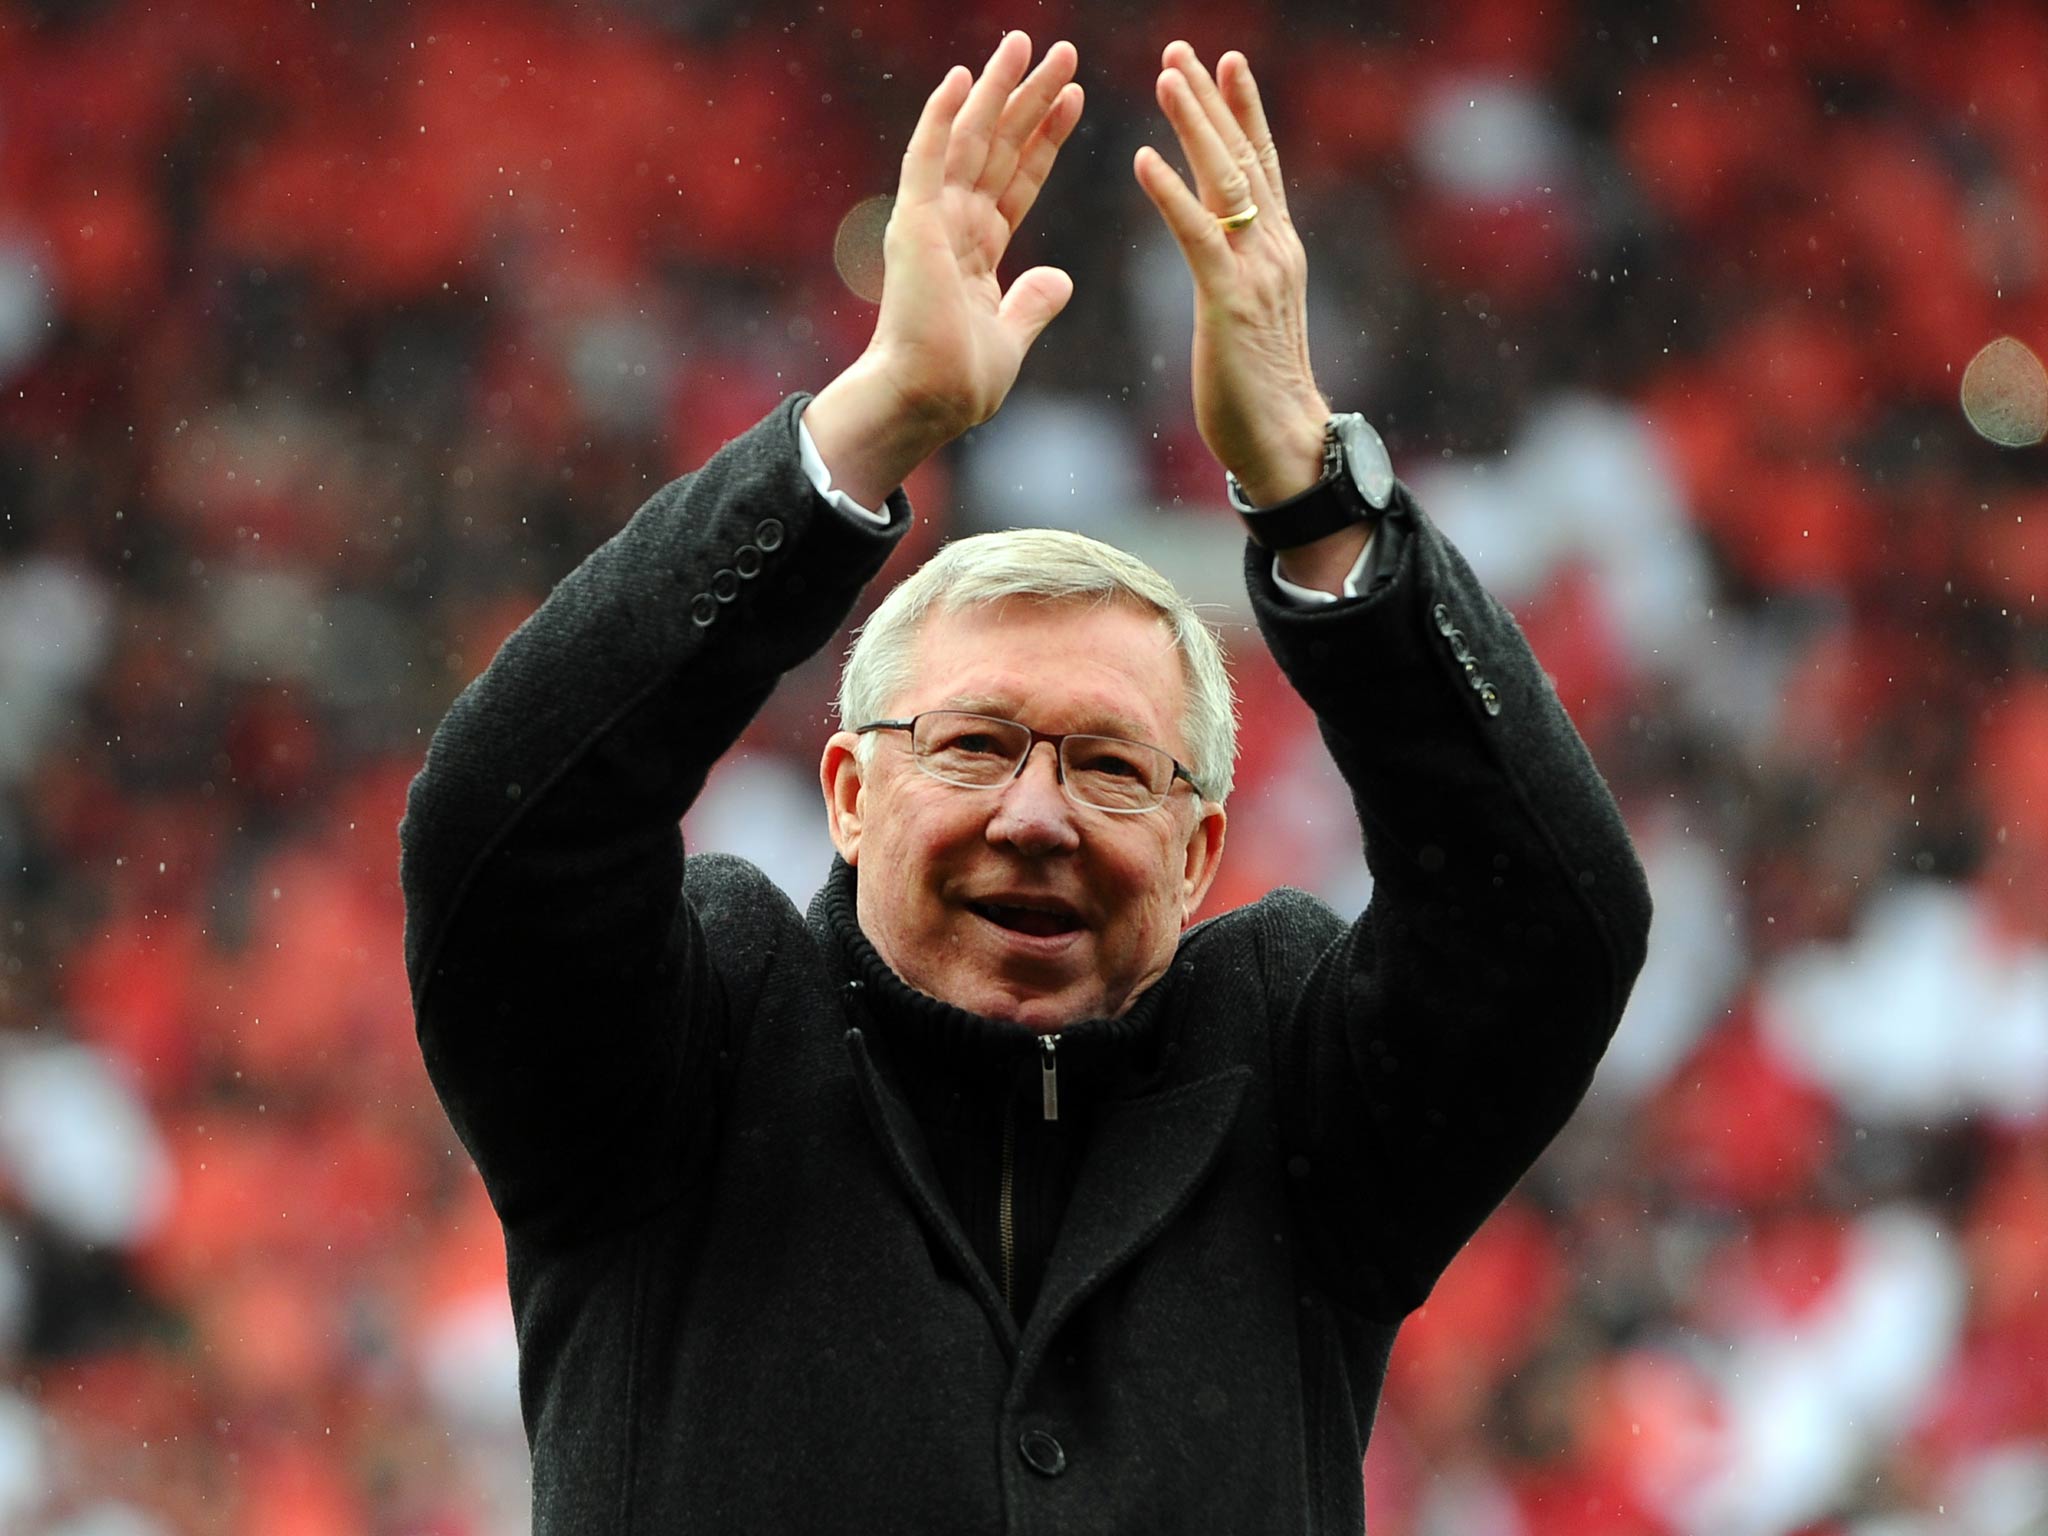 Sir Alex Ferguson applauds the Old Trafford crowd as he says goodbye before his retirement